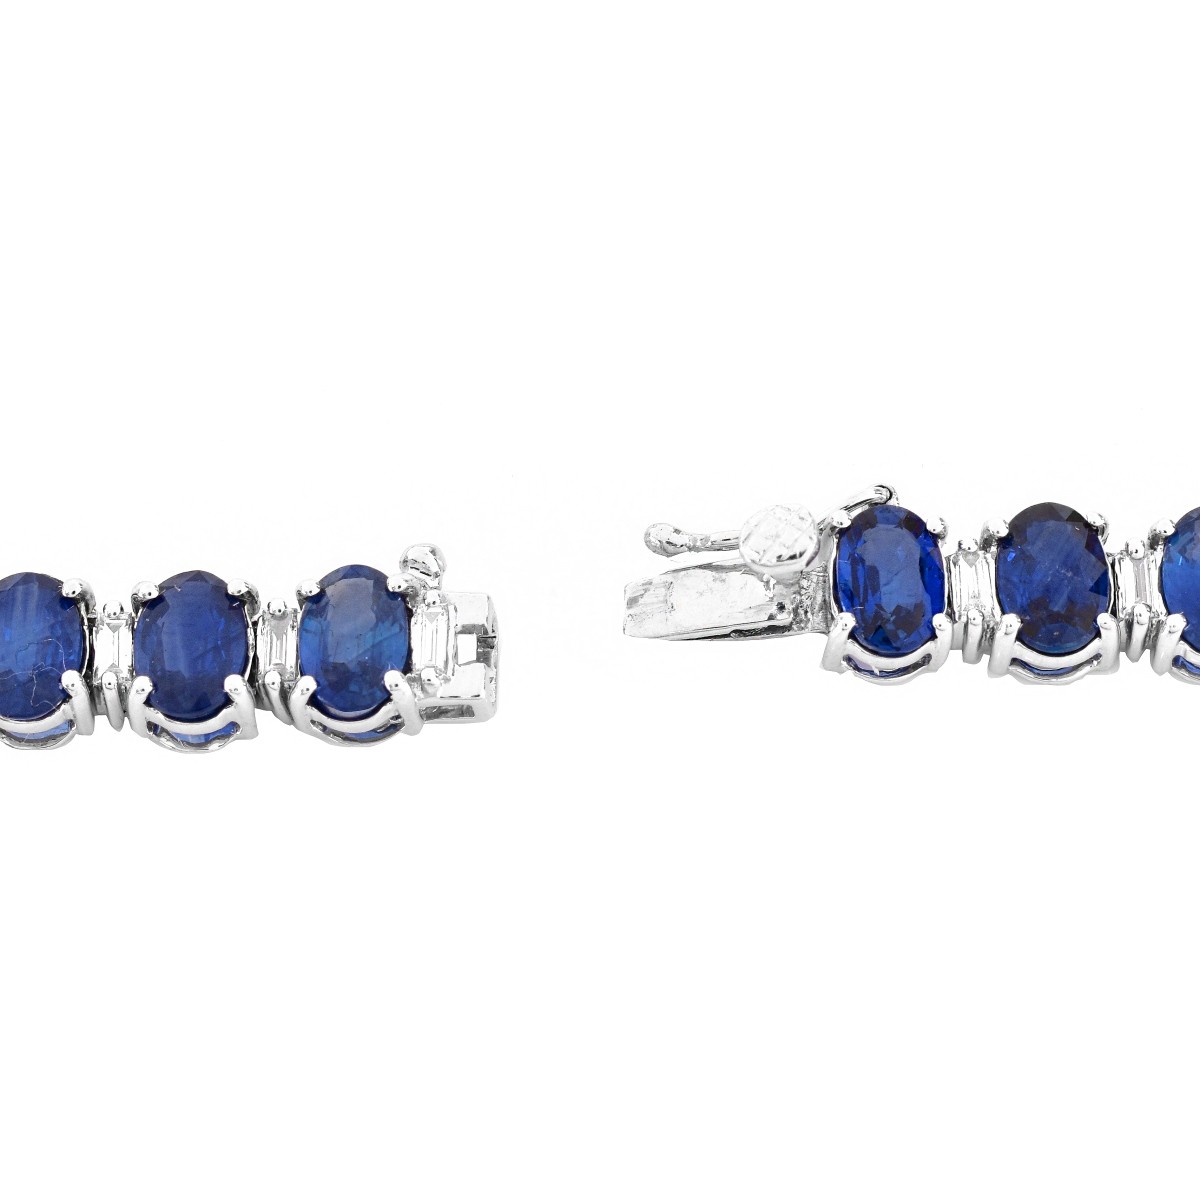 50.0ct Sapphire, Diamond and 18K Gold Necklace